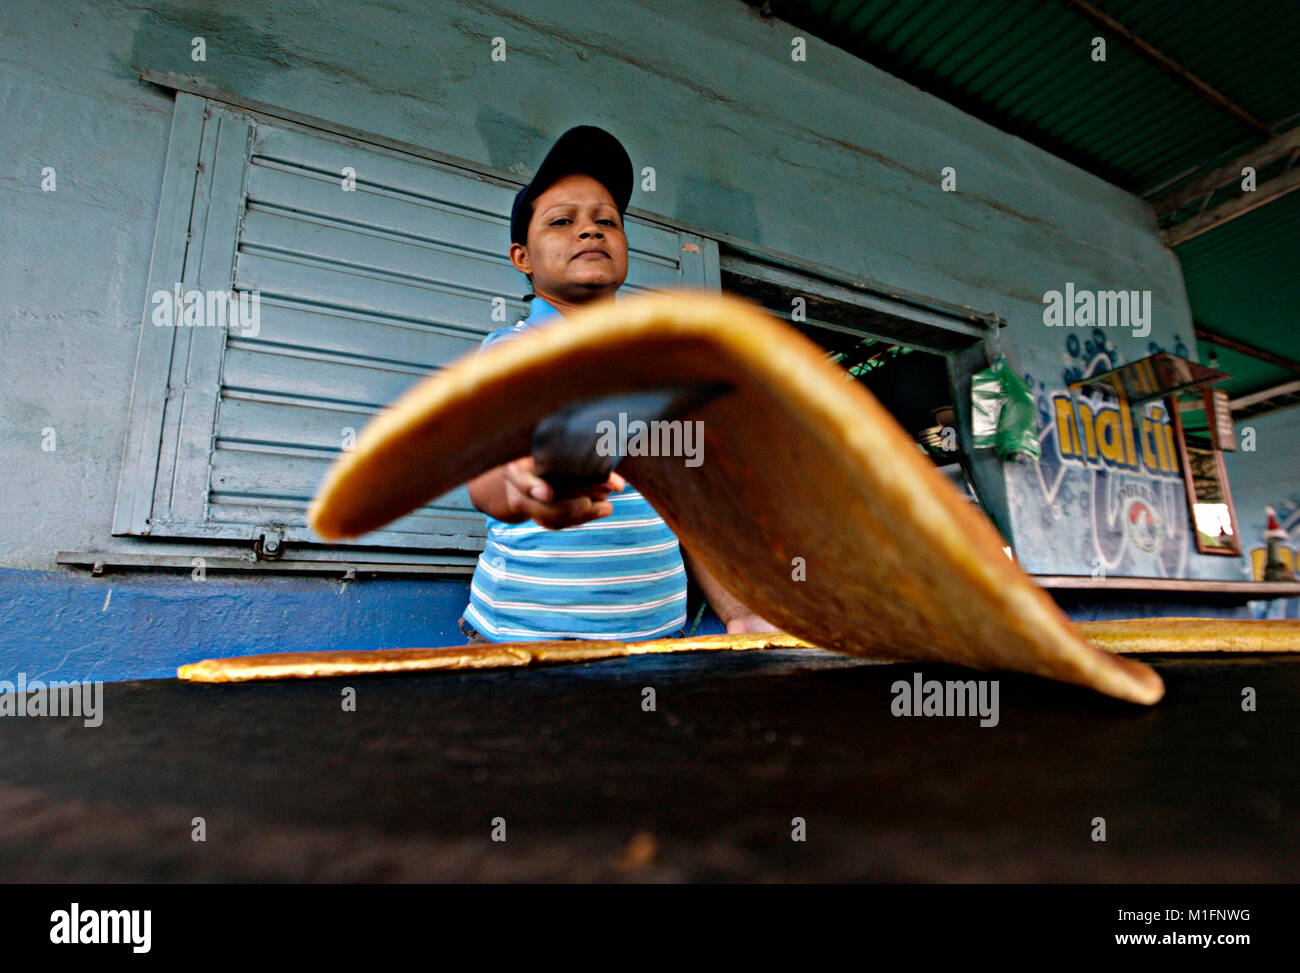 Maturin, Monagas, Venezuela. 8th Dec, 2012. december 09, 2012.A woman flips the cachapas in the budare that is a rudimentary kitchen of brick and clay, in the city of Matur'n, Monagas state, Venezuela.foto: Juan Carlos Hernandez Credit: Juan Carlos Hernandez/ZUMA Wire/Alamy Live News Stock Photo